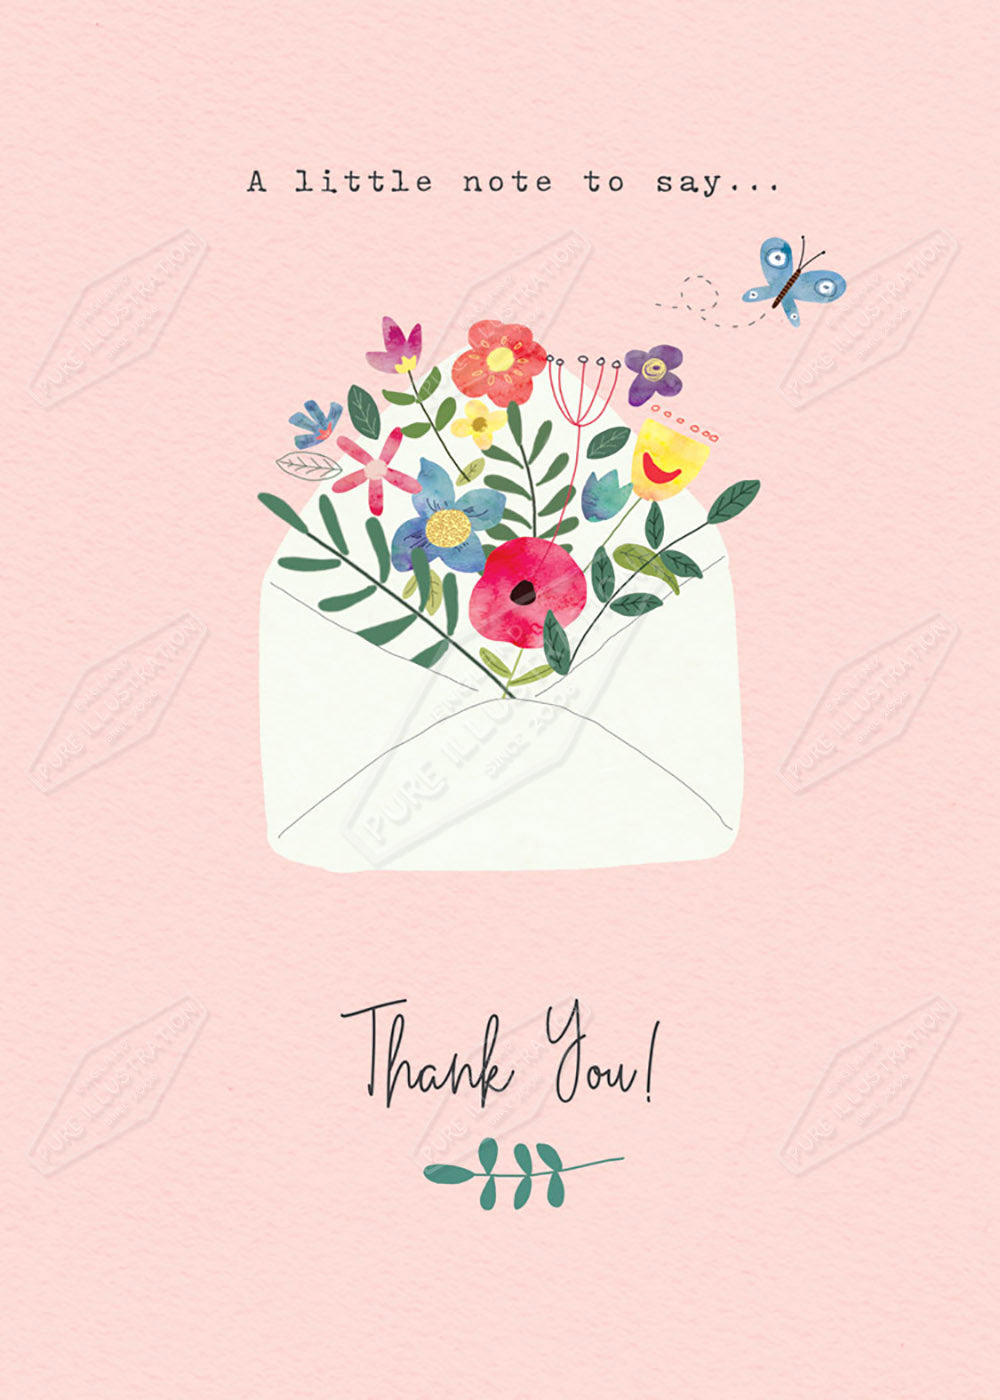 Thank You Greeting Card Illustration by Cory Reid - Pure Art Licensing Agency & Surface Design Studio